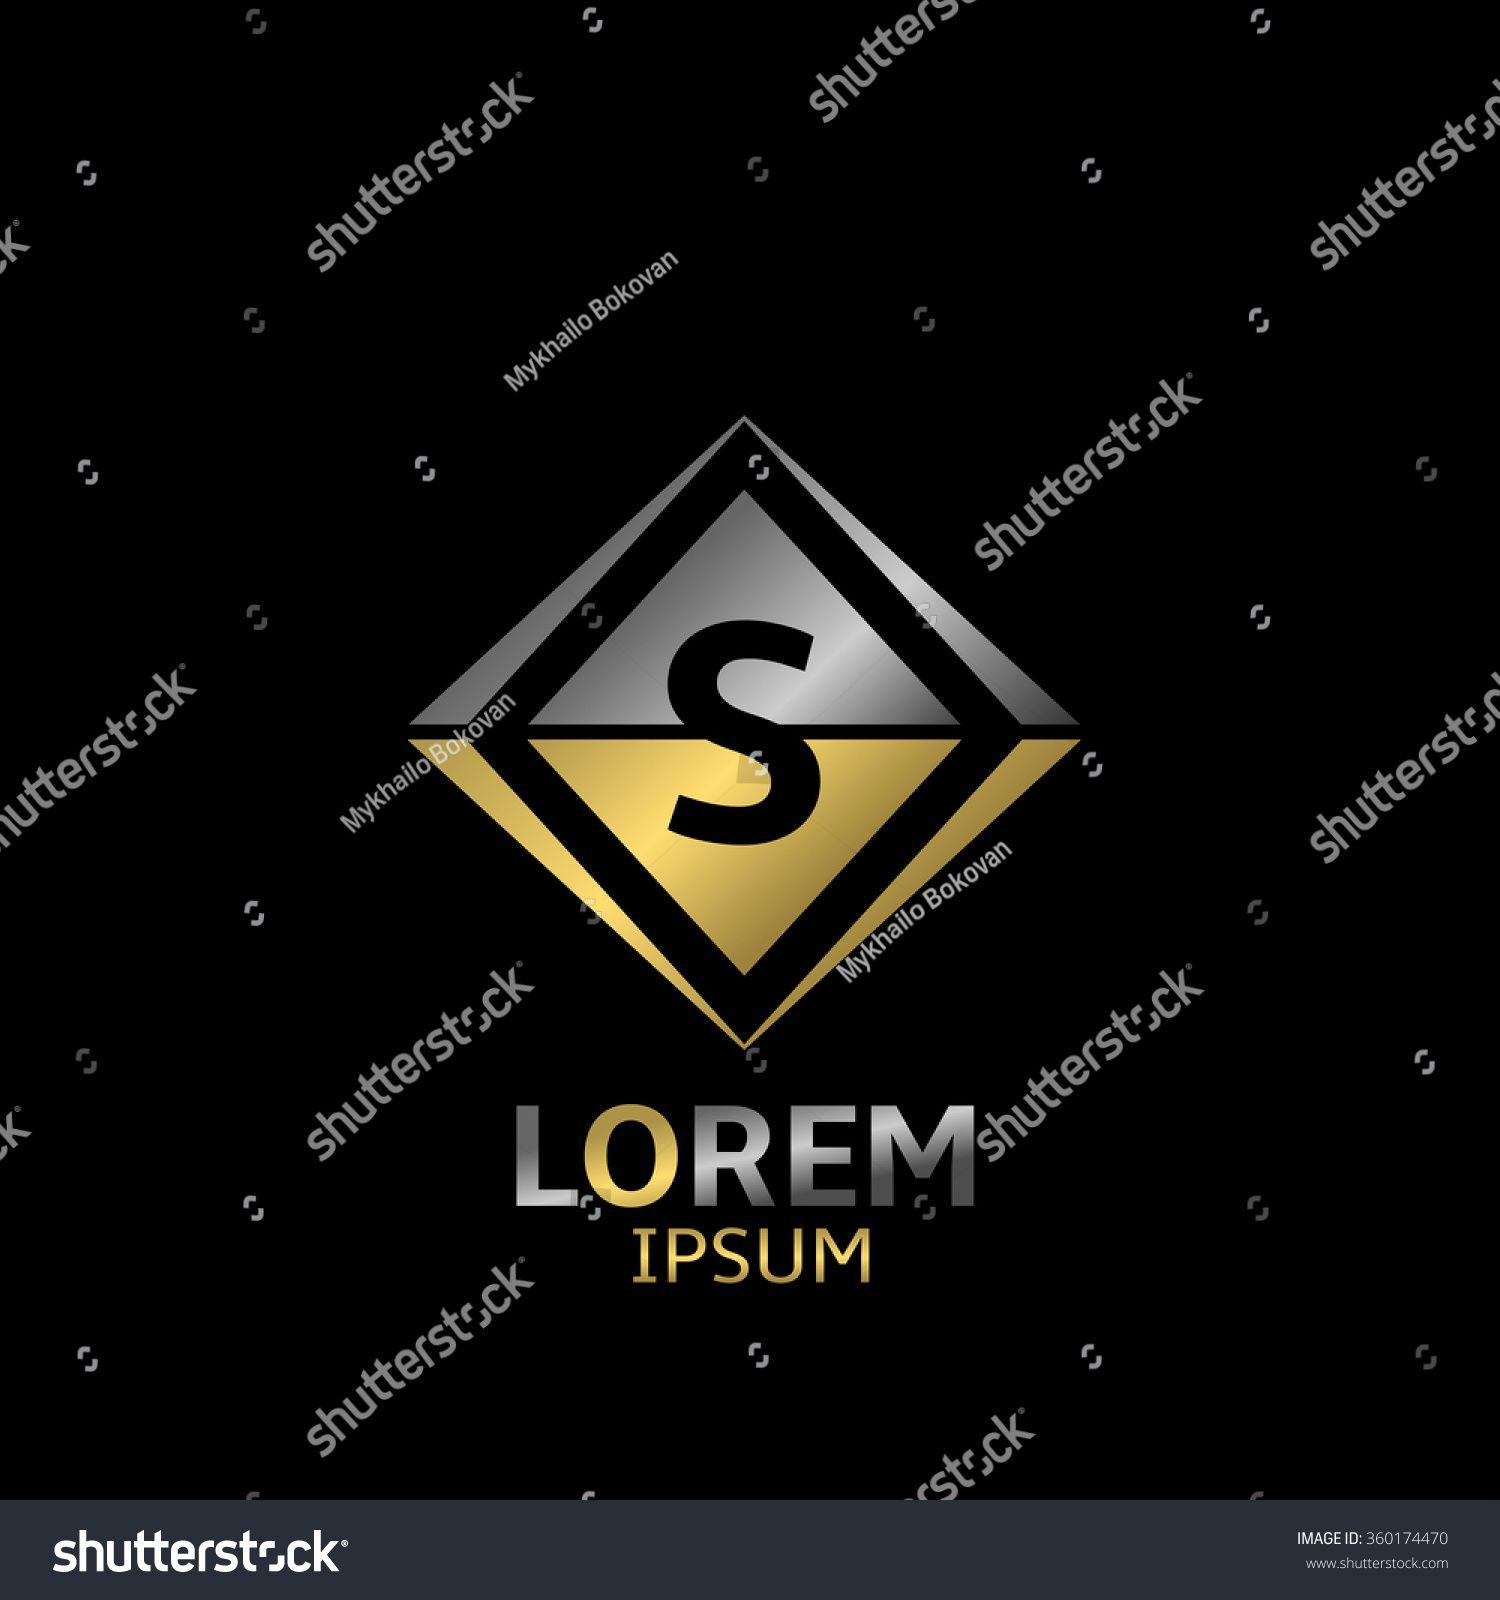 Golden S Logo - Letter S logo. Brand symbol with golden and silver elements, Vector